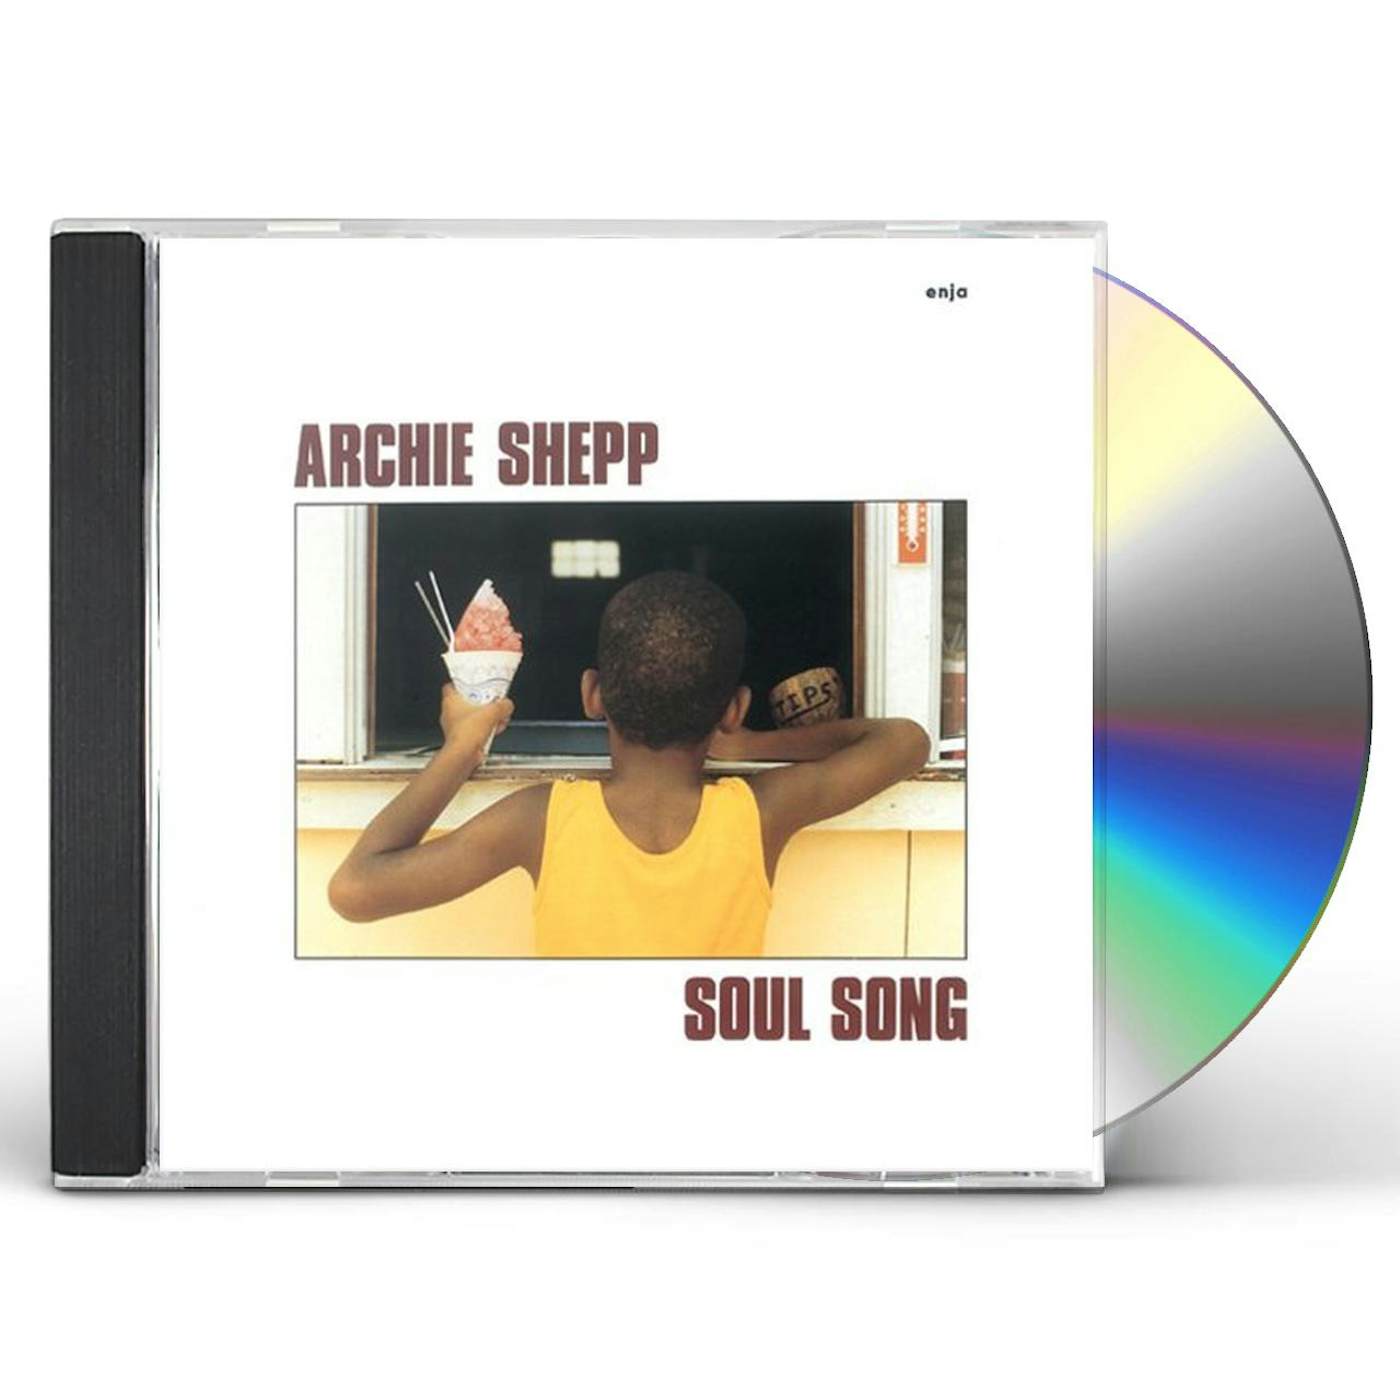 Archie Shepp SOUL SONG CD